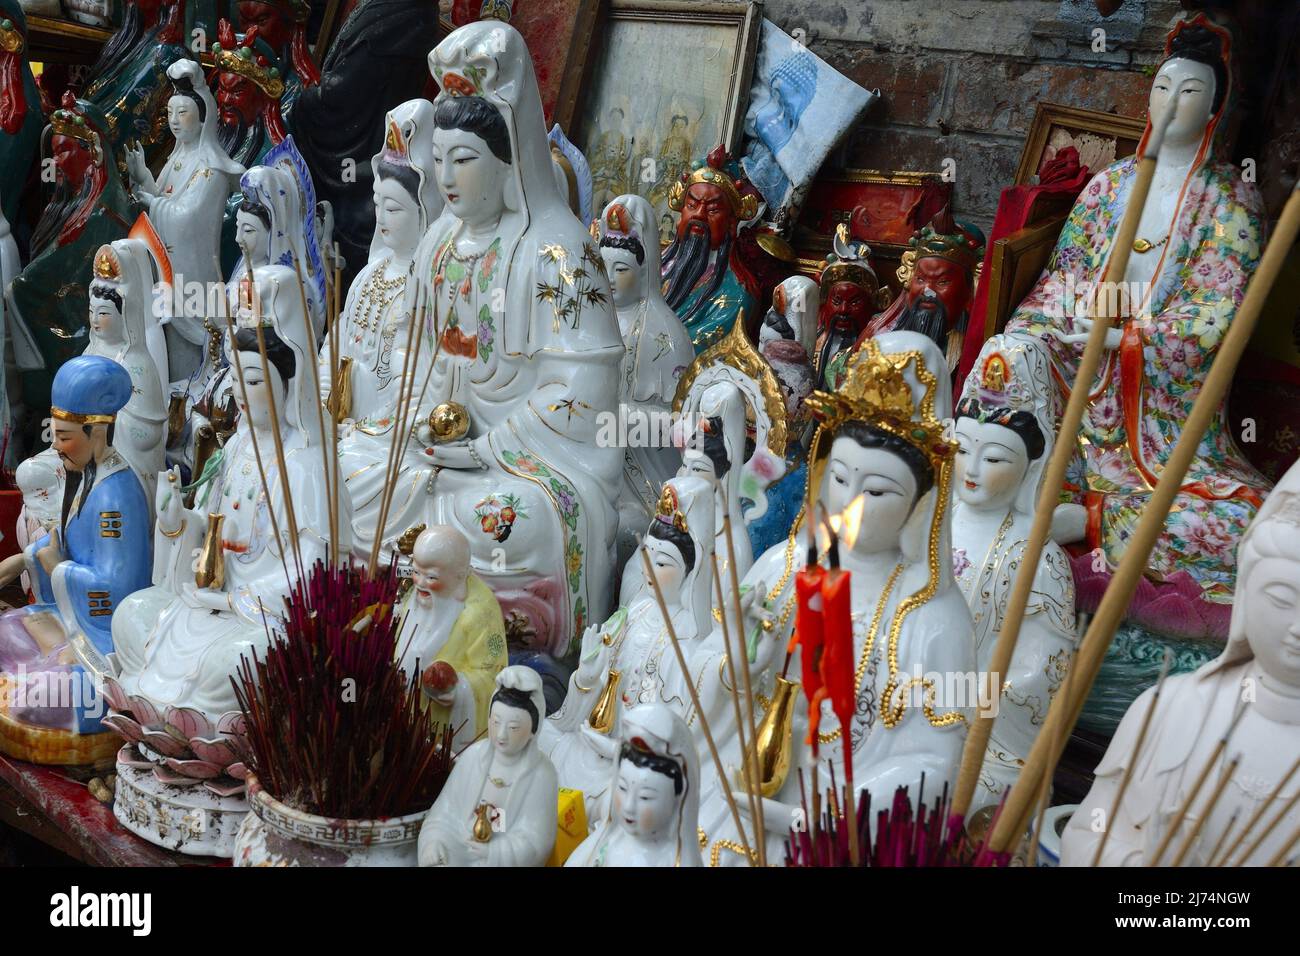 Adoration figures with joss sticks on a small altar on a street in Kowloon, China, Hong Kong Stock Photo